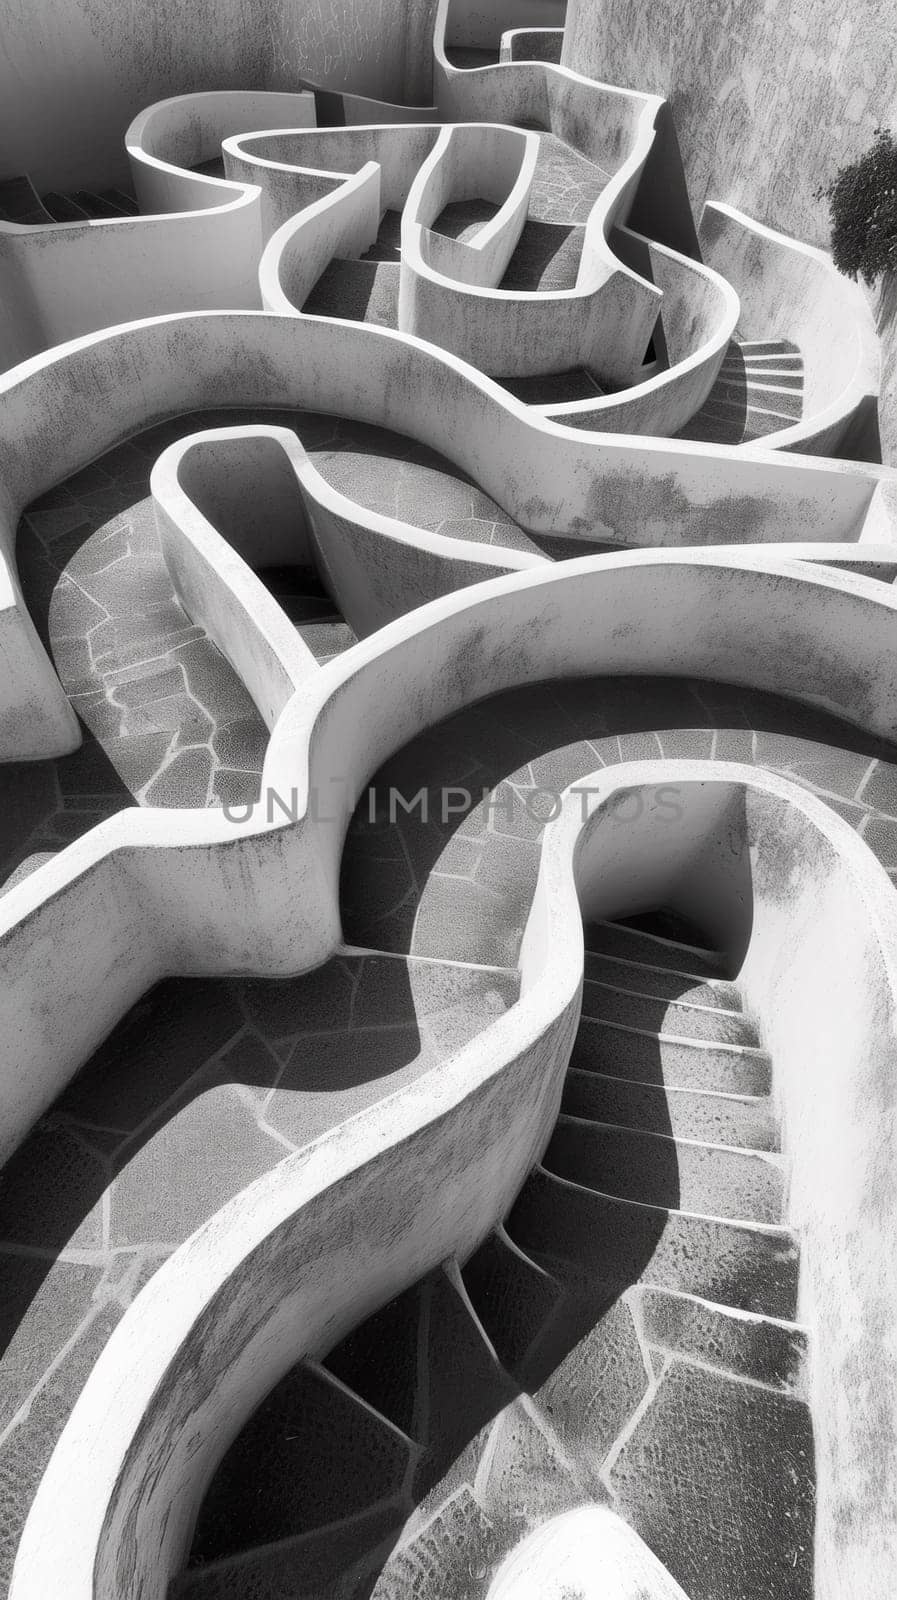 A black and white photograph of a spiral staircase